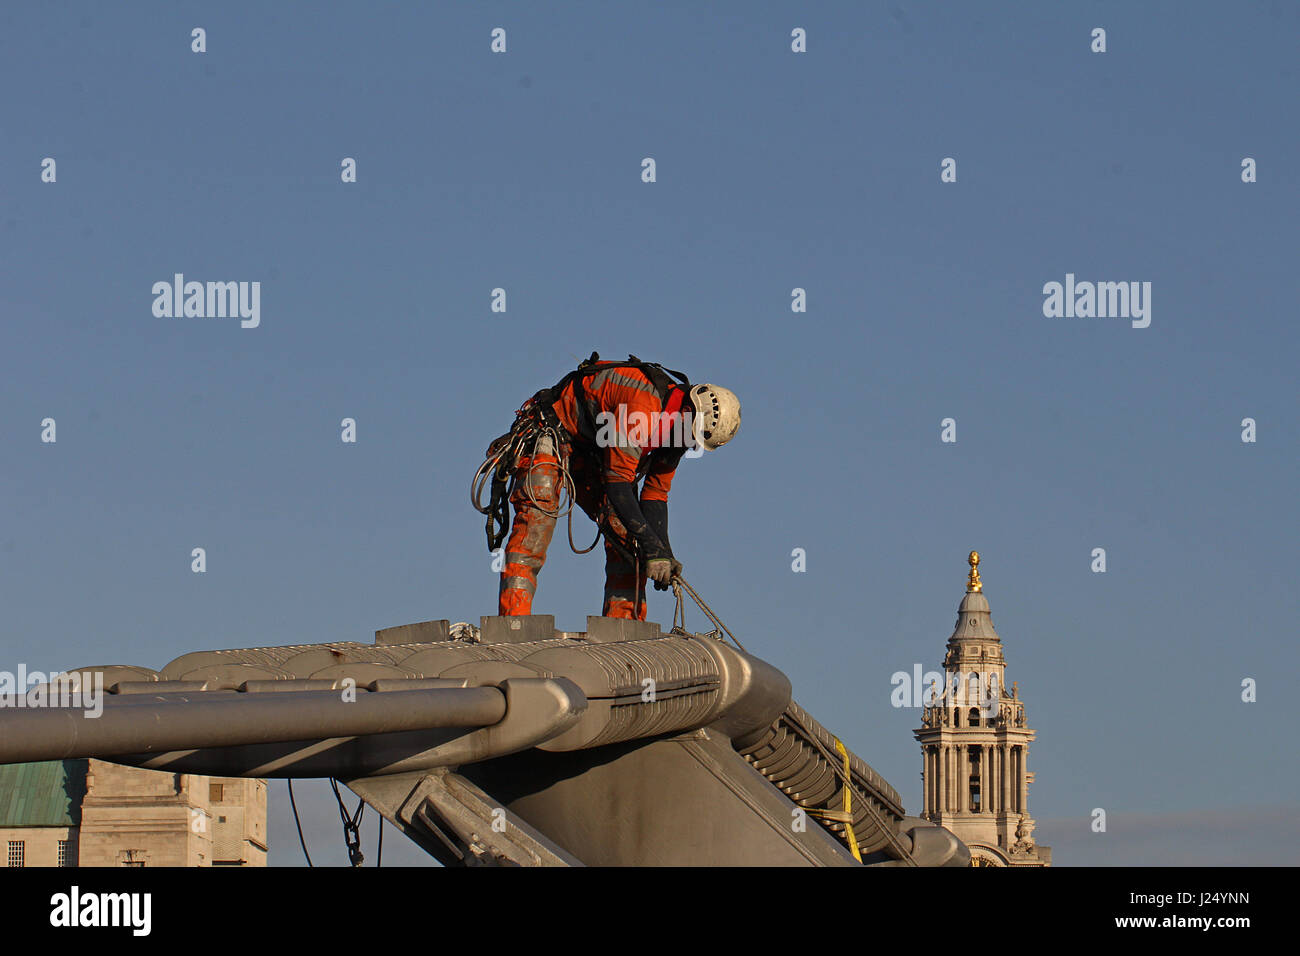 A bridge engineer, wearing a safety harness, on top of the Millennium Bridge, London Stock Photo